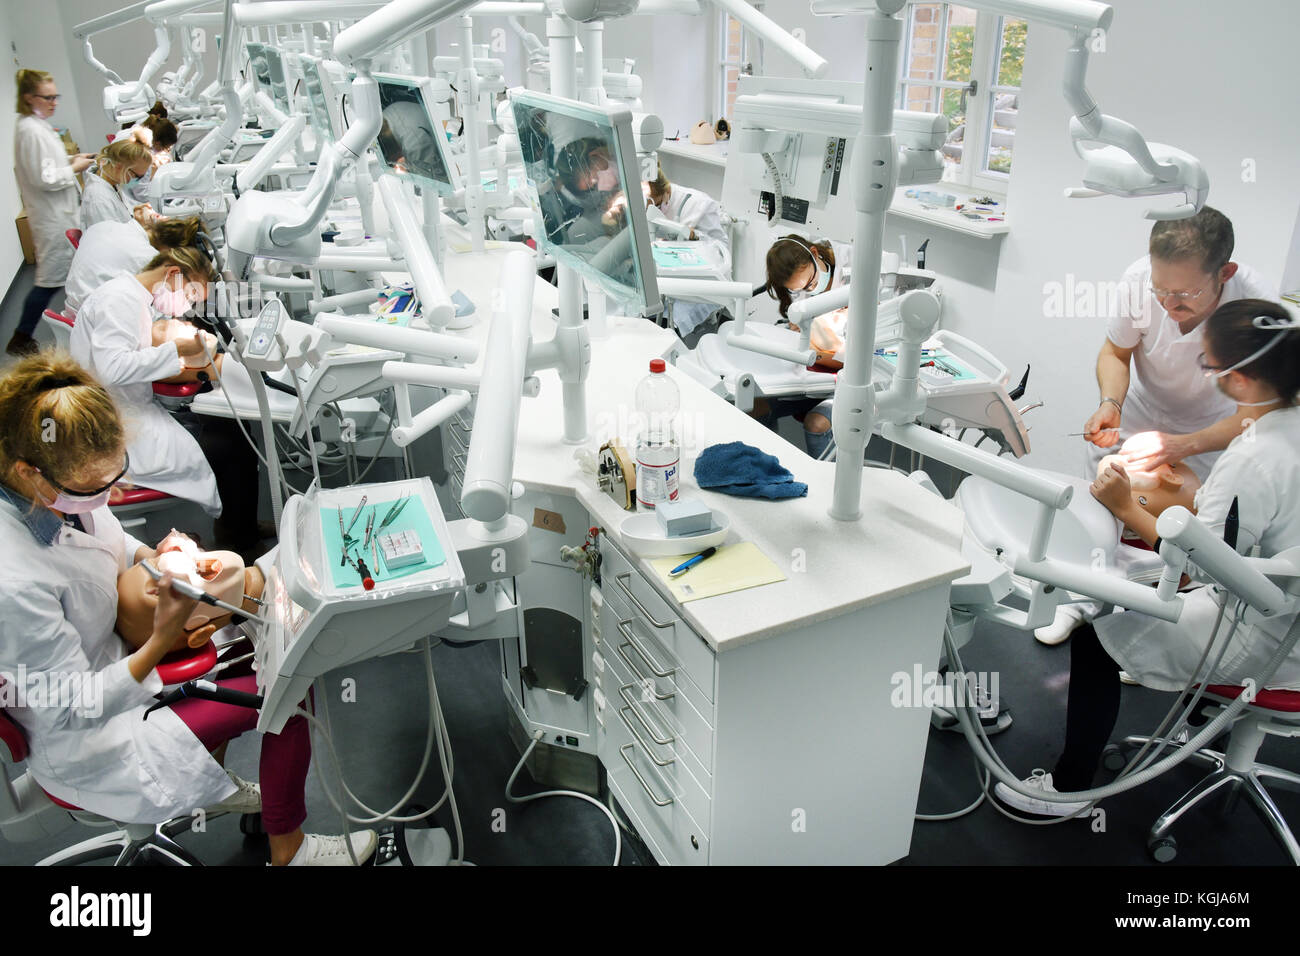 Fifth semester dentistry students from the School of Medicine of Martin Luther University Halle-Wittenberg grinding practice teeth on state-of-the-art dental simulation units in Halle (Saale), Germany, 23 October 2017. Students are able to work on practice heads with original equipment and drill working procedures in this training hall. The dental clinic, which also counts with a room for treatment by students, was delivered to the School of Medicine as one of Germany's most modern dental clinics in September. About 240 students arre currently receiving here their training. Photo: Waltraud Gru Stock Photo